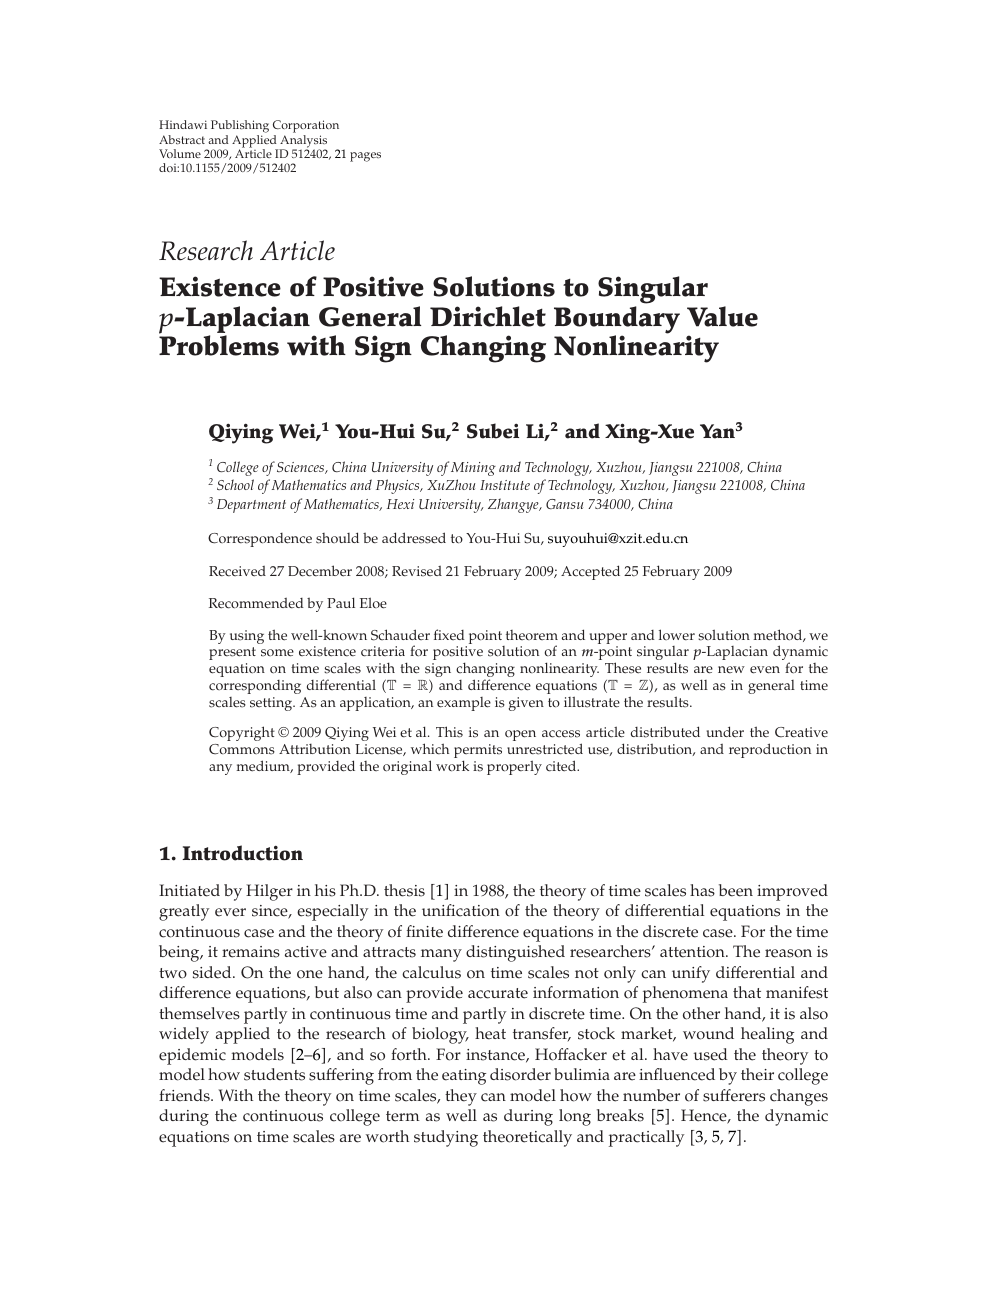 Existence Of Positive Solutions To Singular 𝑝 Laplacian General Dirichlet Boundary Value Problems With Sign Changing Nonlinearity Topic Of Research Paper In Mathematics Download Scholarly Article Pdf And Read For Free On